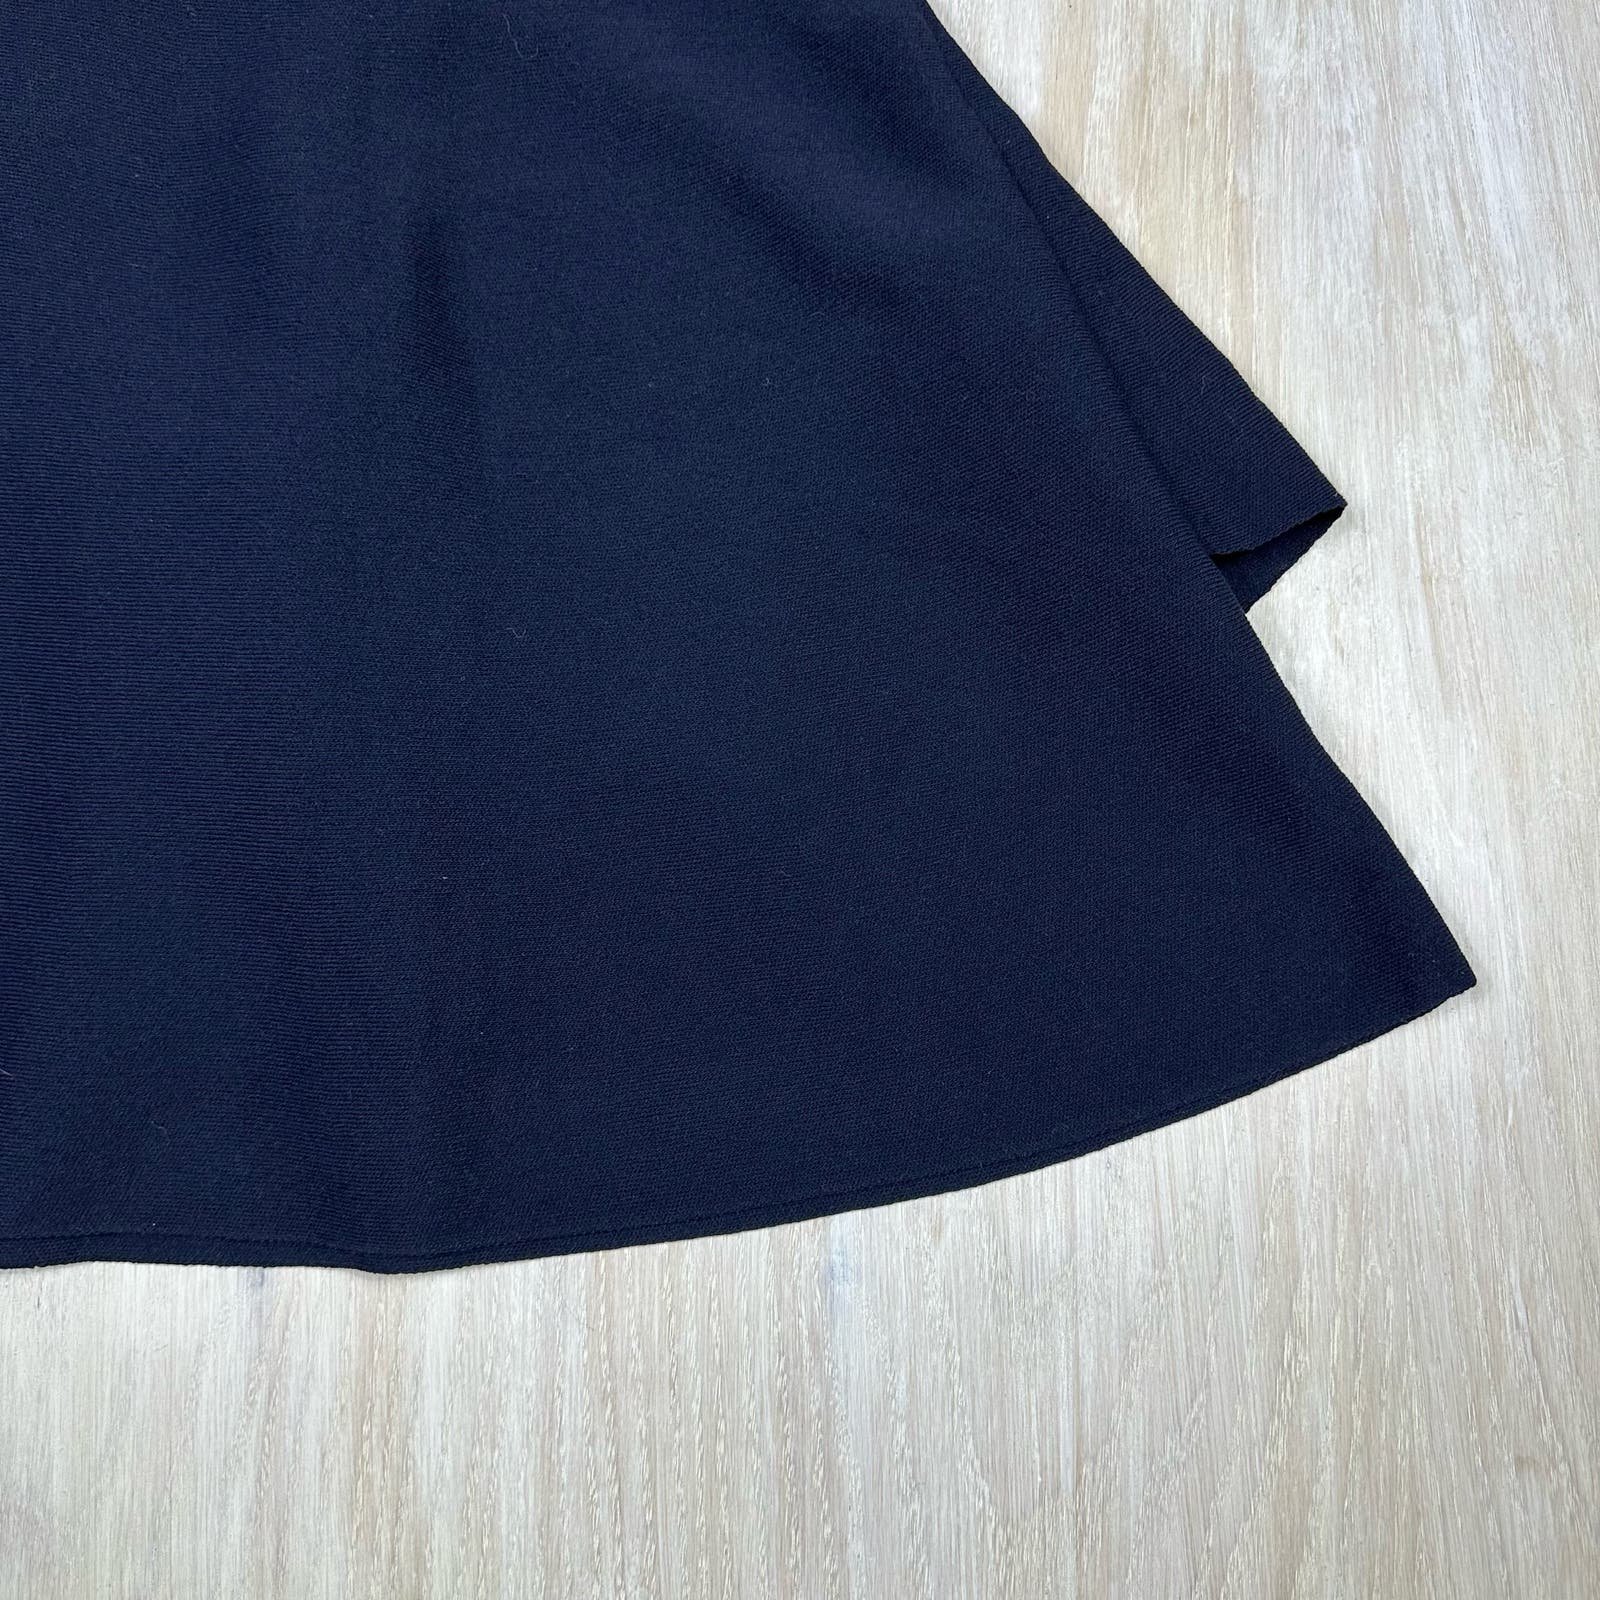 Discounted Zara Basic Navy Tiered Knit Pull On Skirt Size Small itR5kcDNk online store